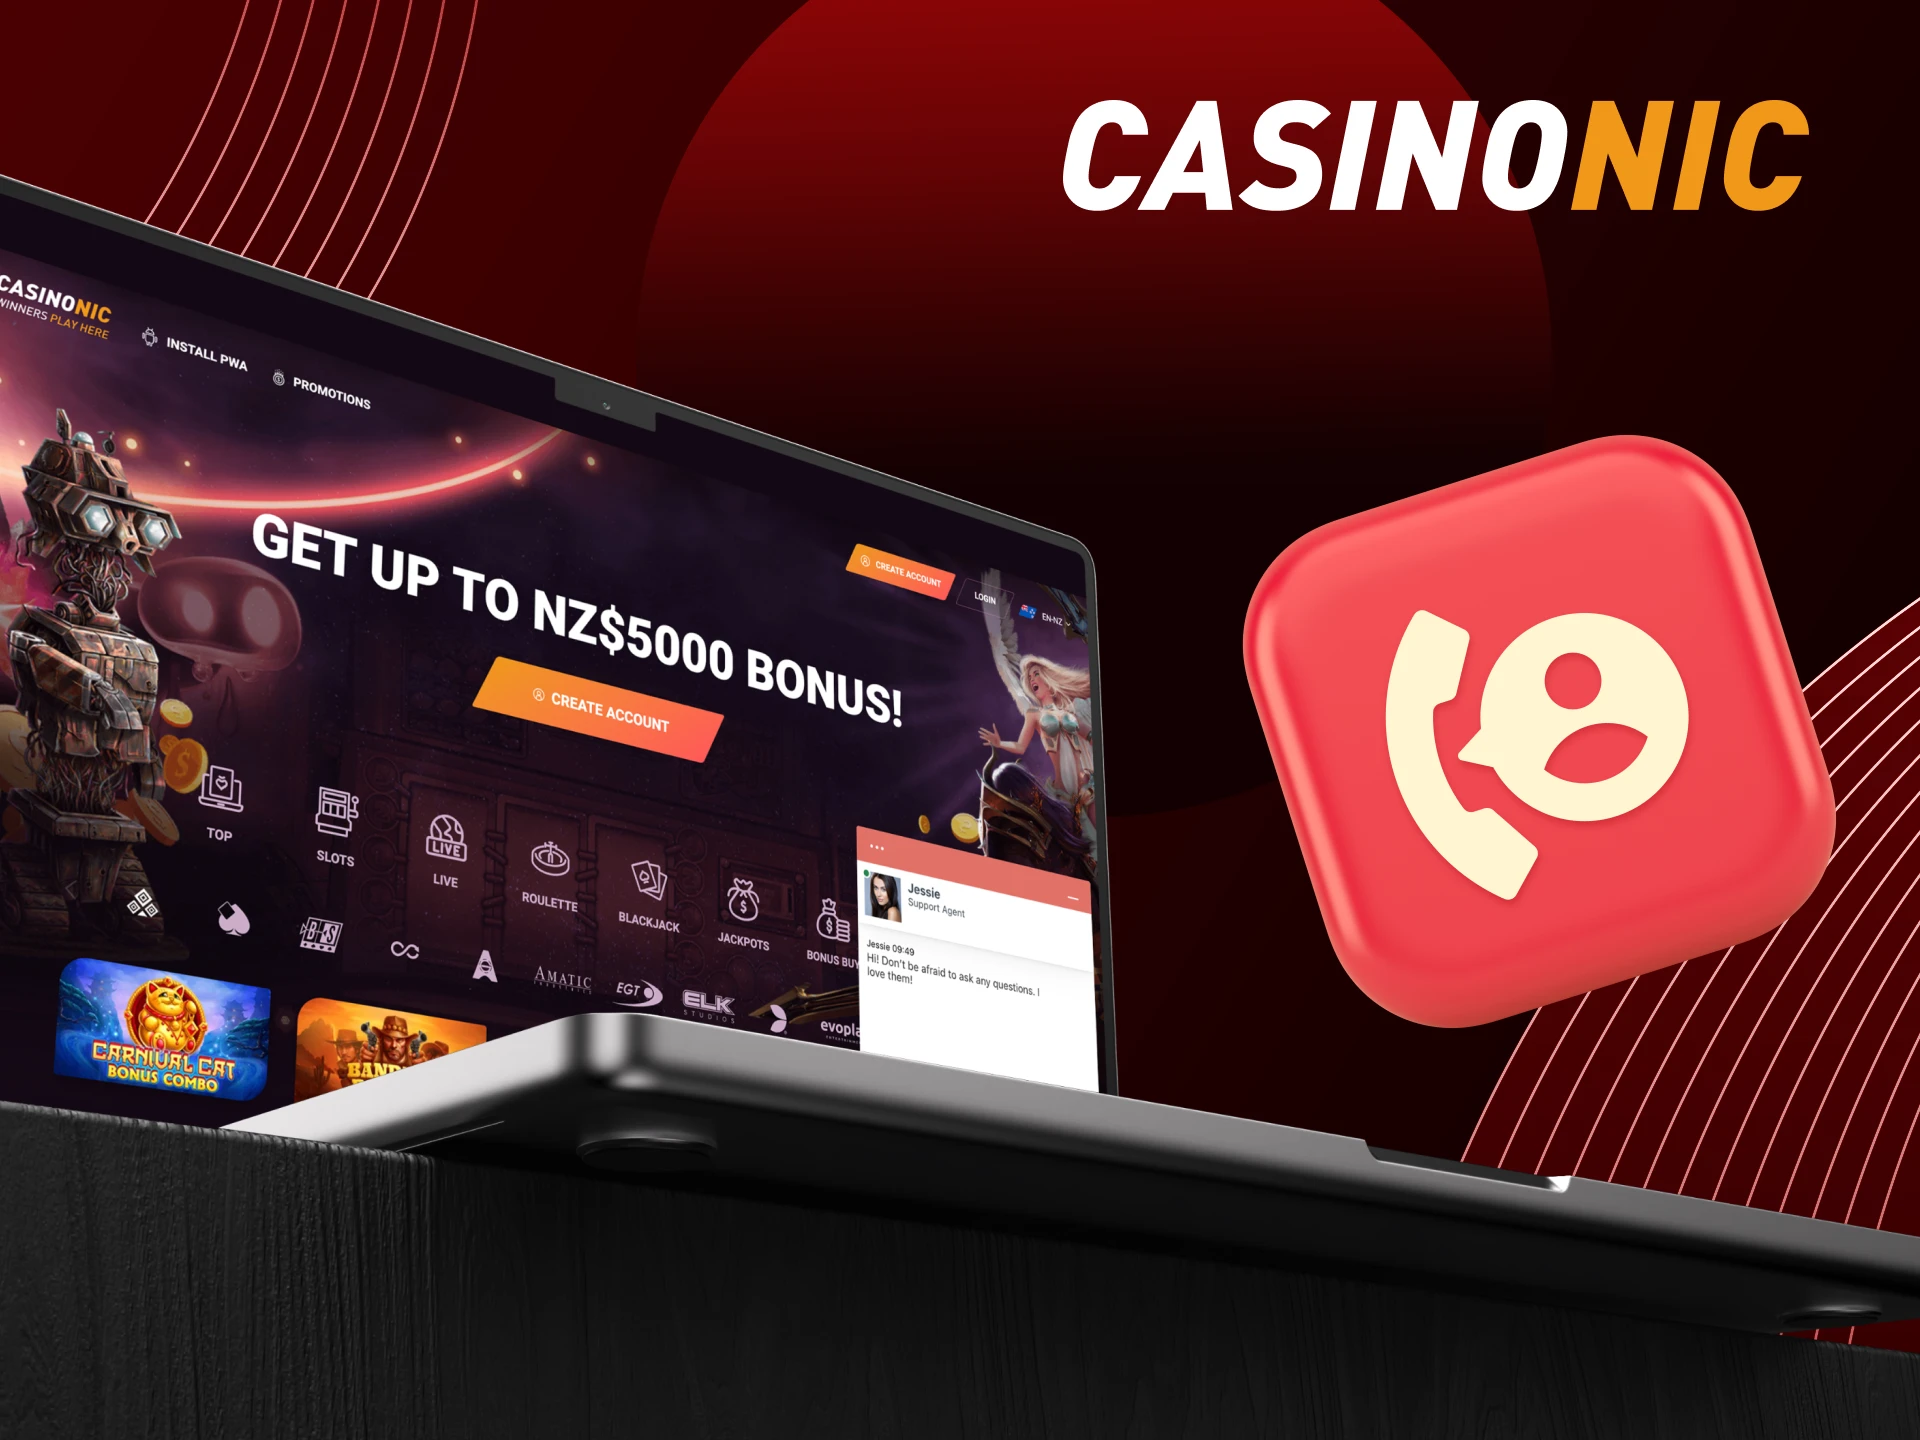 Can I contact the technical support service of the online casino CasinoNic.